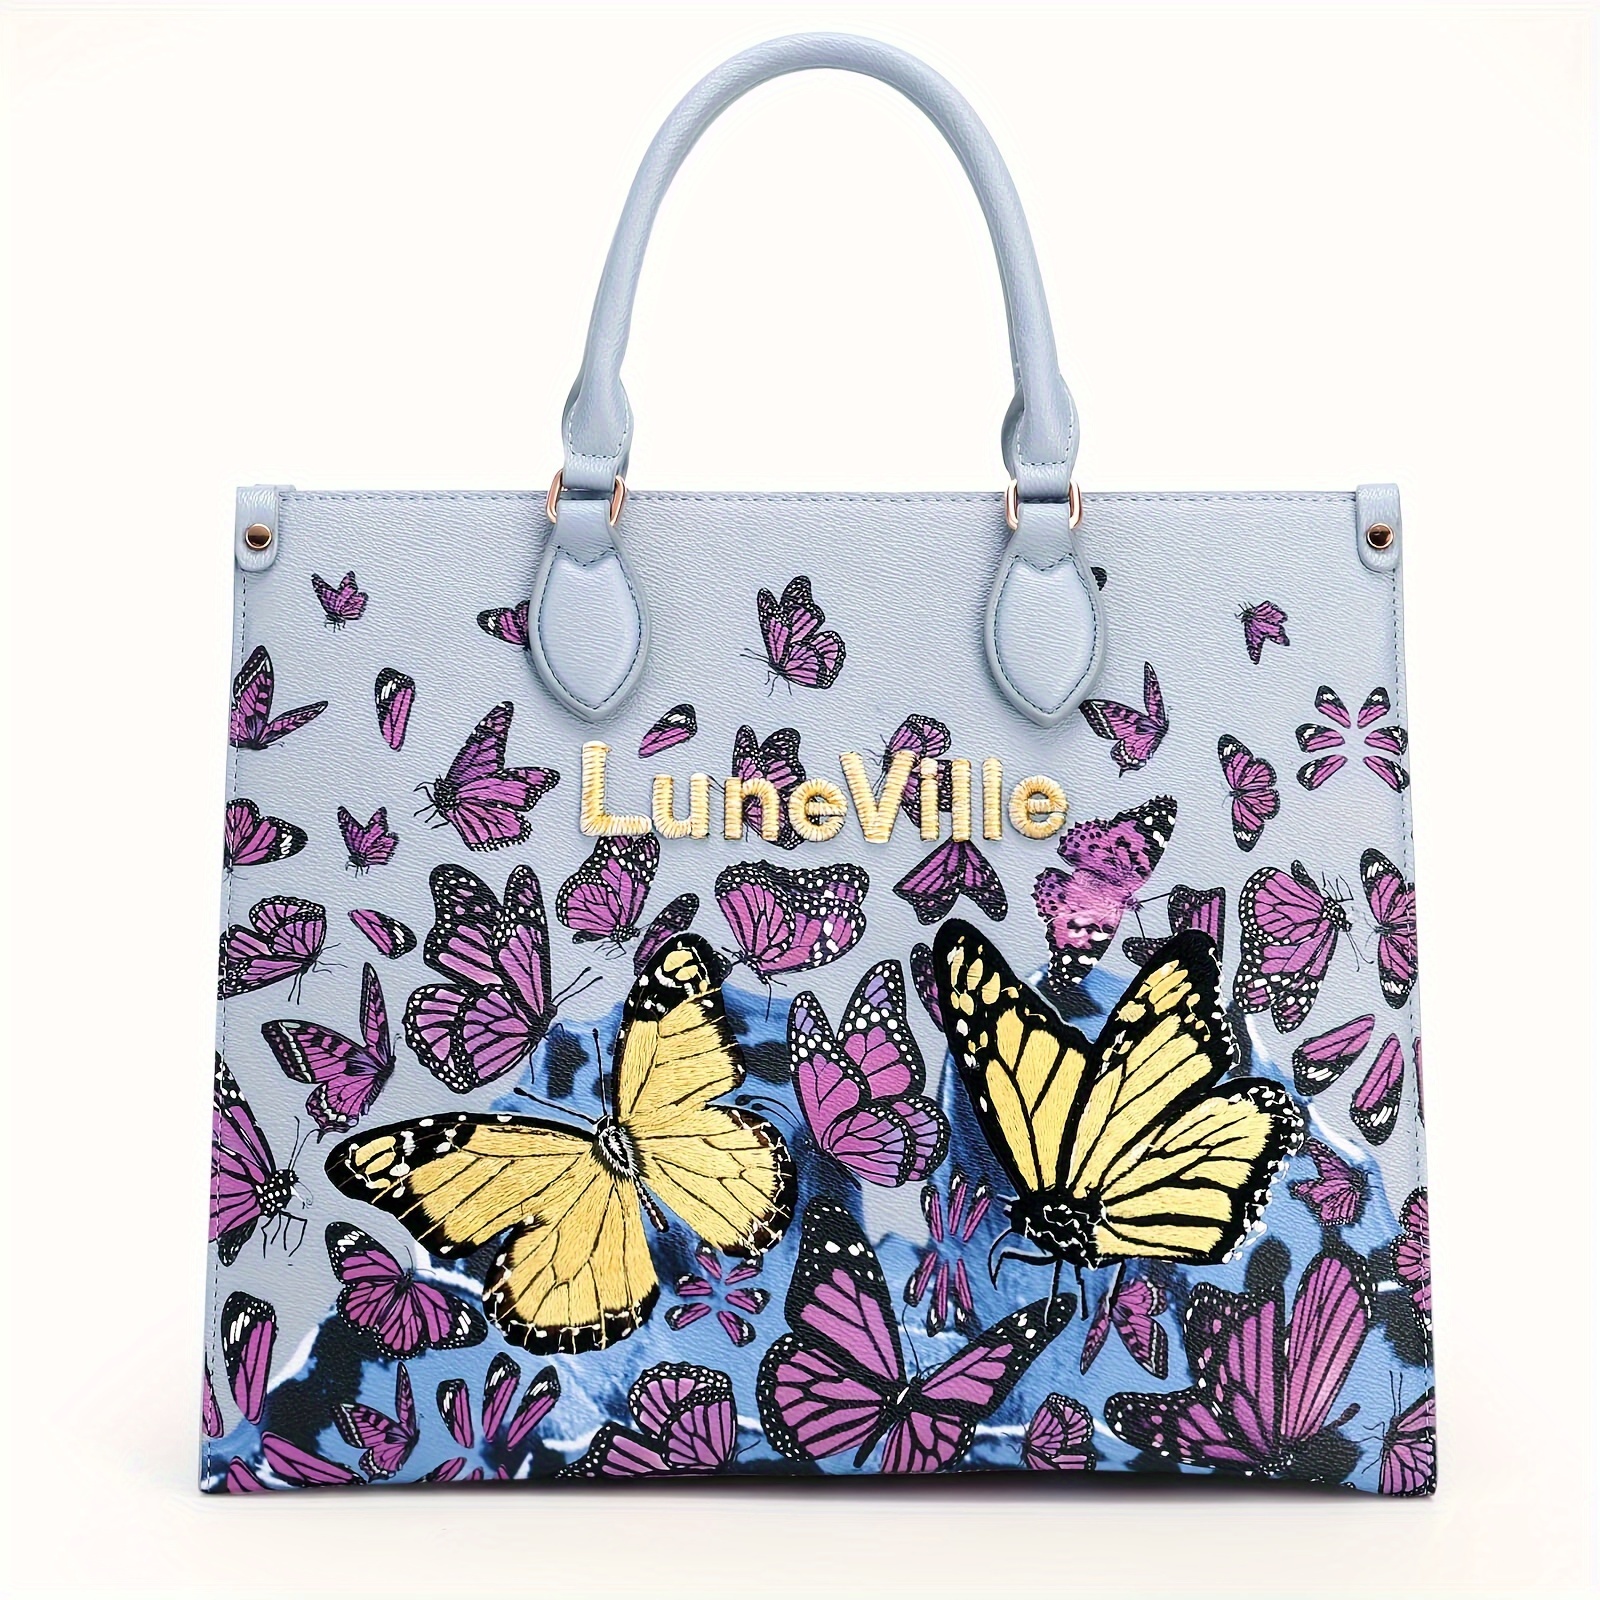 

Women's Butterfly Print Handbag, Faux Leather, Shoulder Tote Bag With Dual Handles, Fashionable Daily Purse